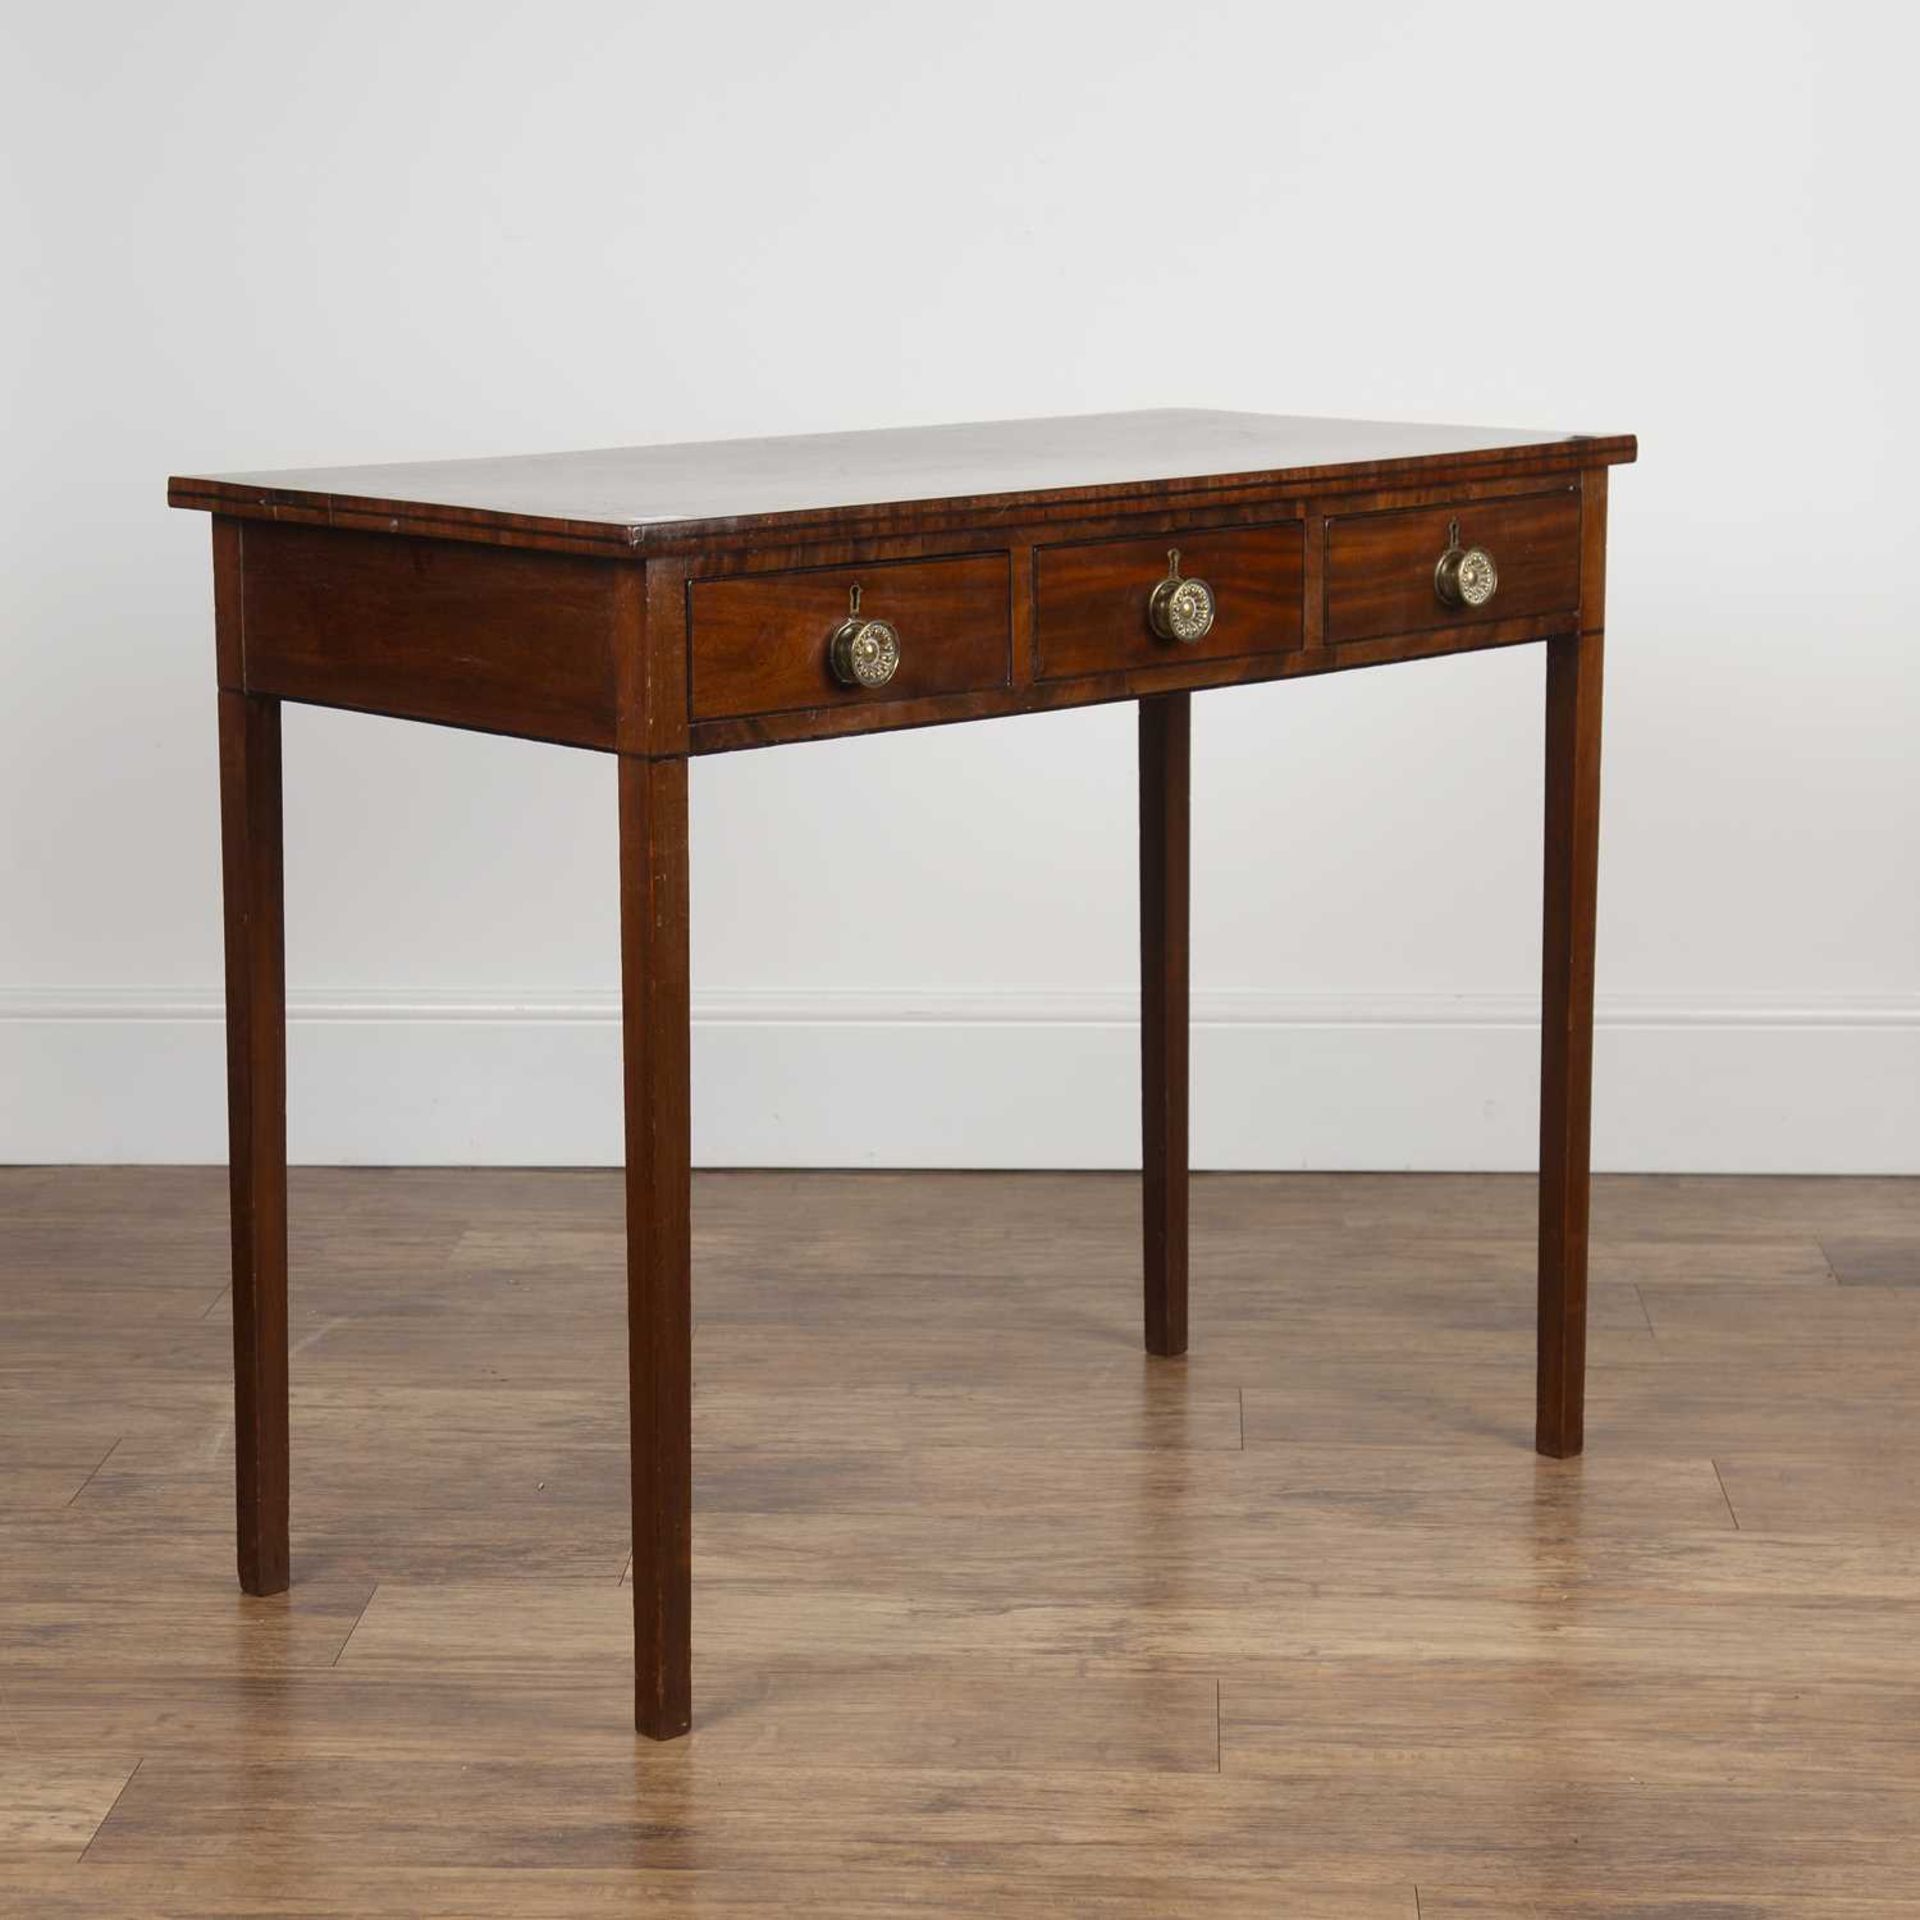 Mahogany side table 19th Century, fitted with three frieze drawers and round brass handles, standing - Bild 2 aus 6